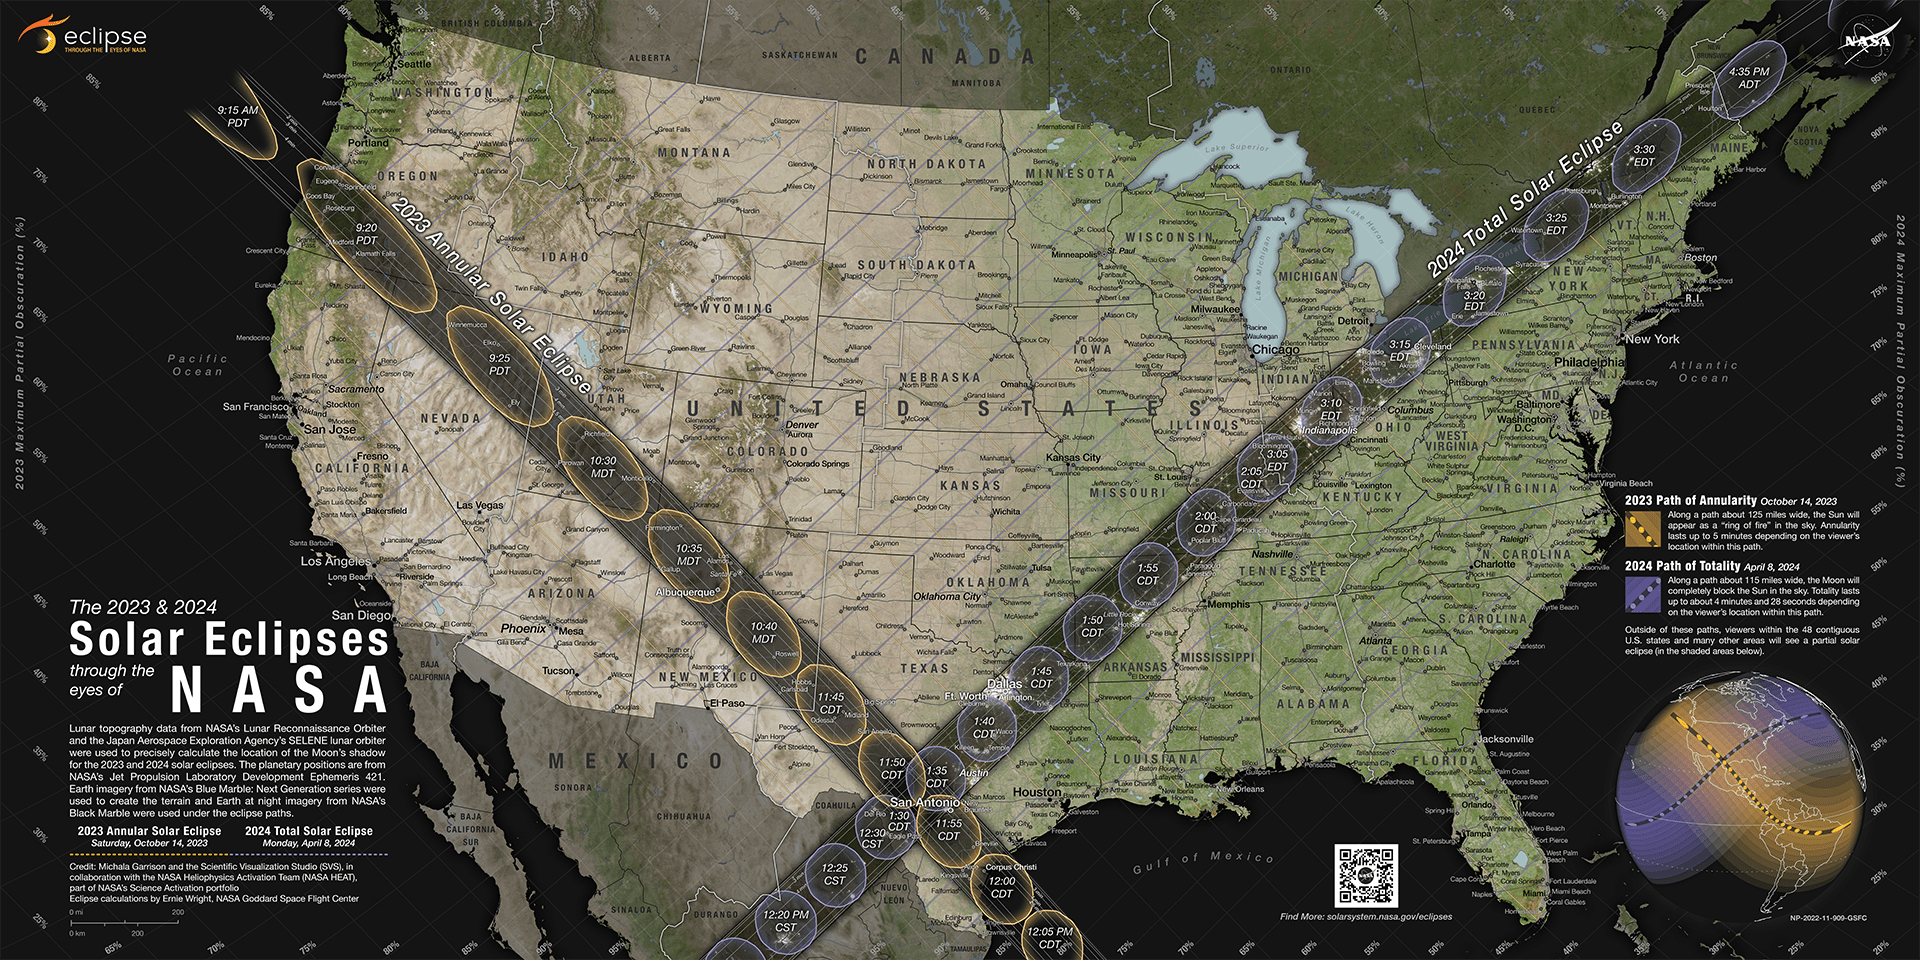 Illustrated map of the United States shows the paths of two eclipses in 2024. Both cross the same spot in Texas, near San Antonio.